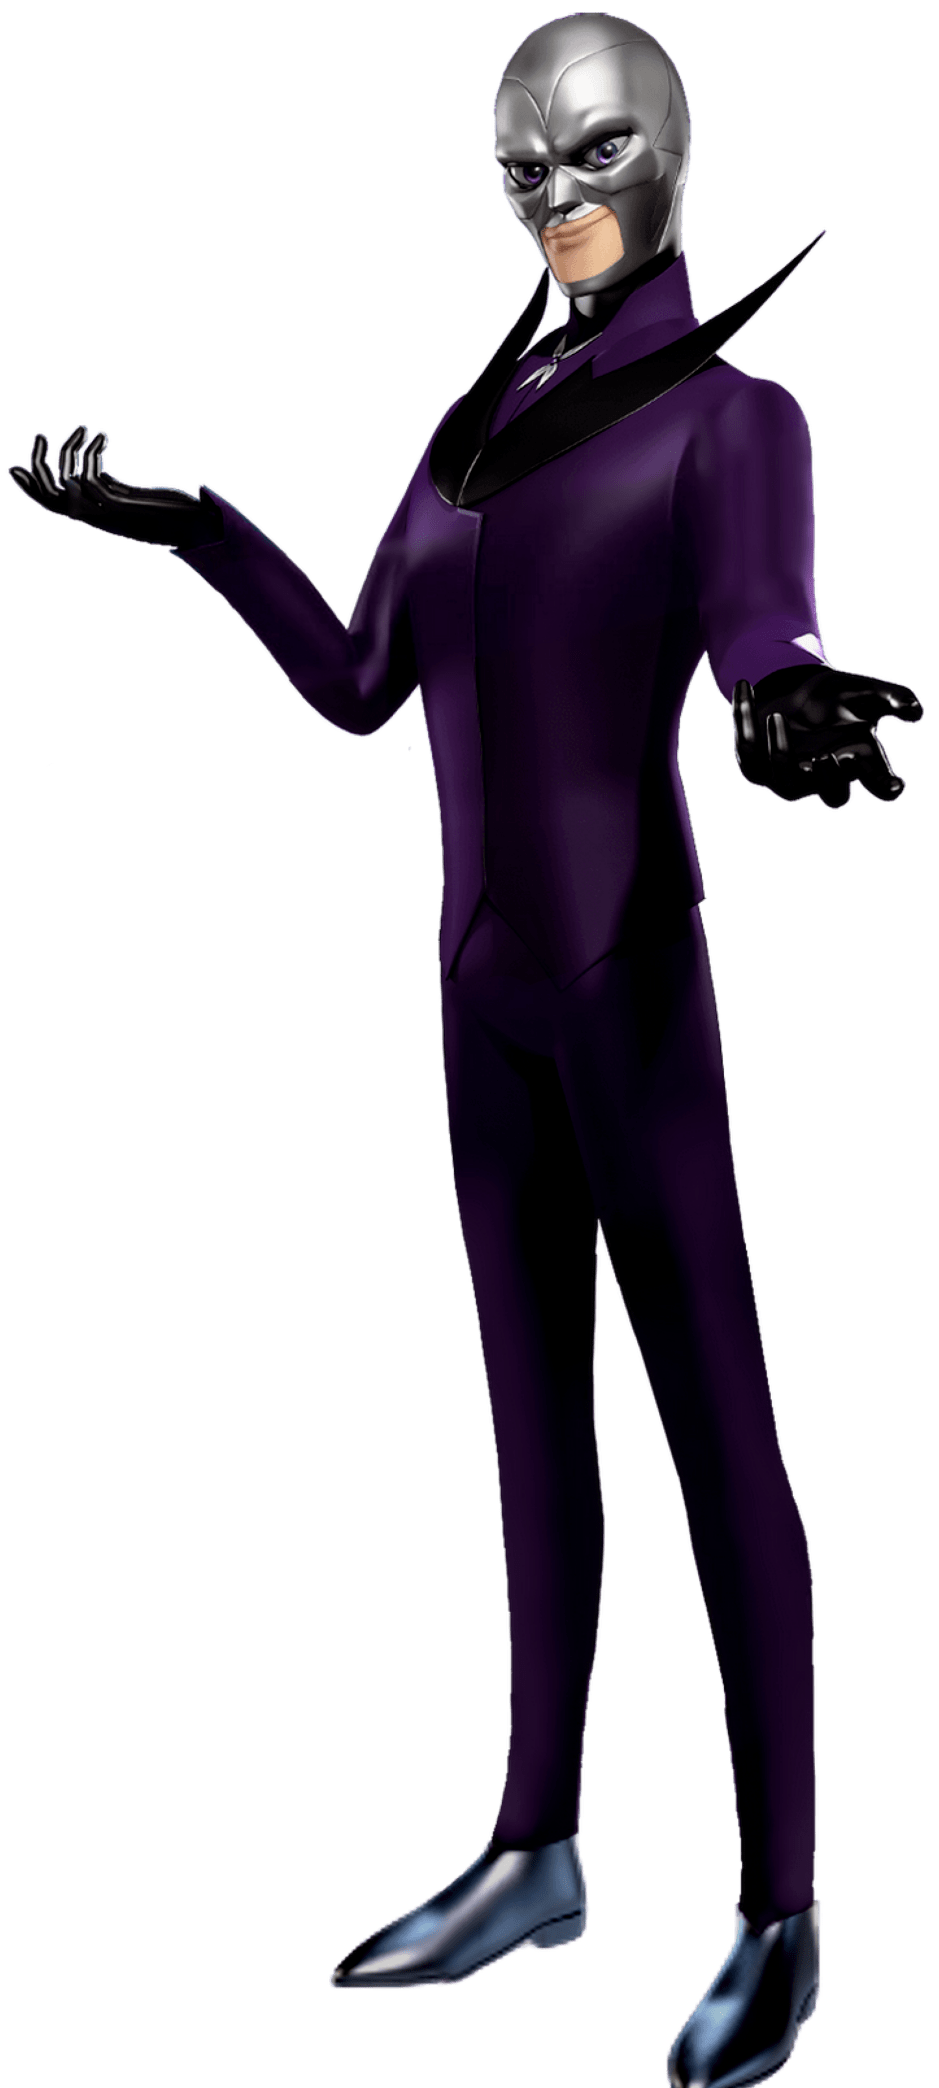 https://static.wikia.nocookie.net/villains/images/a/a9/Hawk_Moth_Miraculous_Ladybug.png/revision/latest?cb=20201231202738